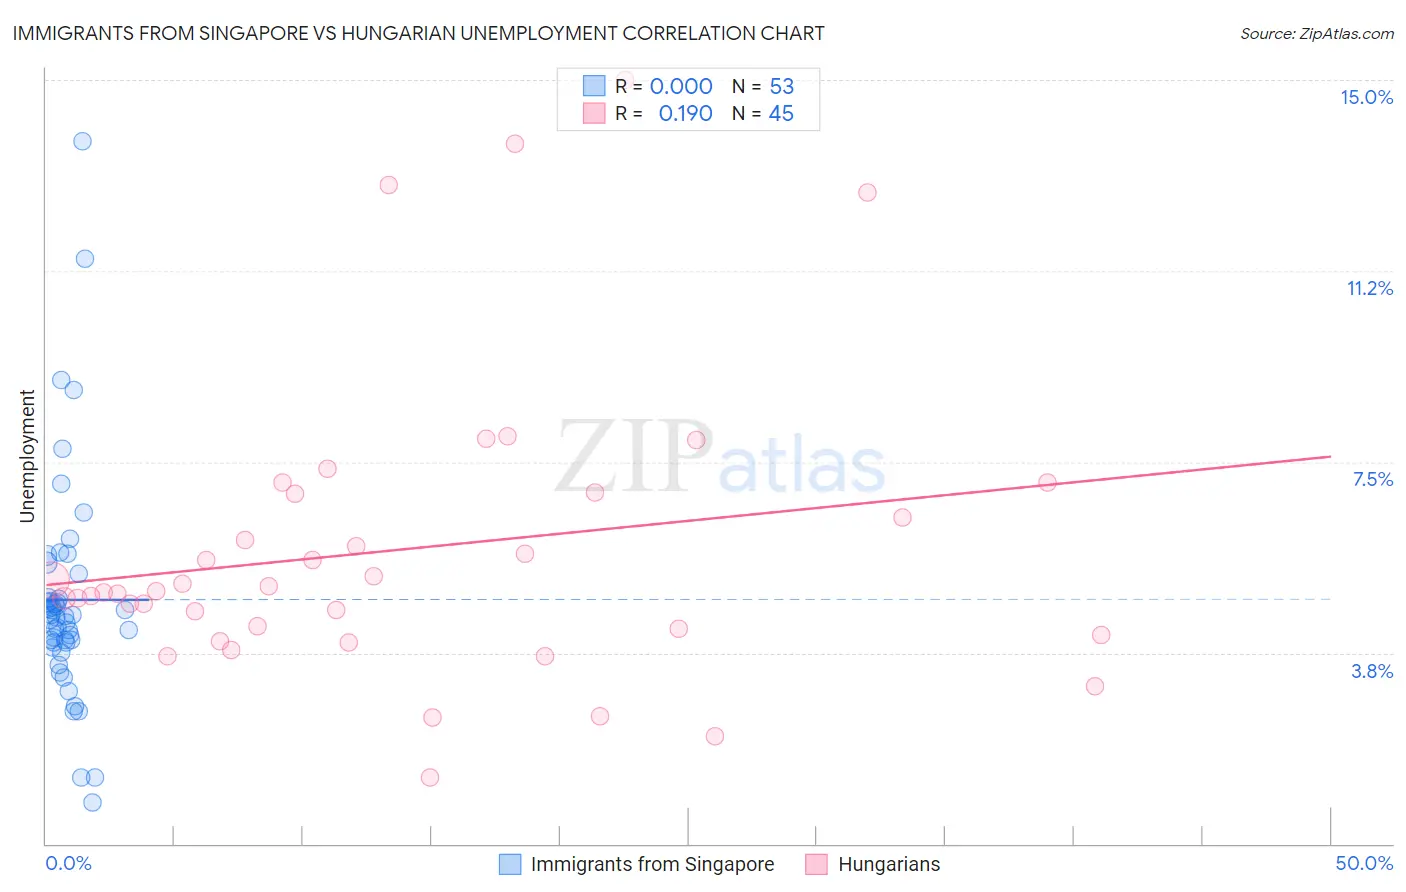 Immigrants from Singapore vs Hungarian Unemployment